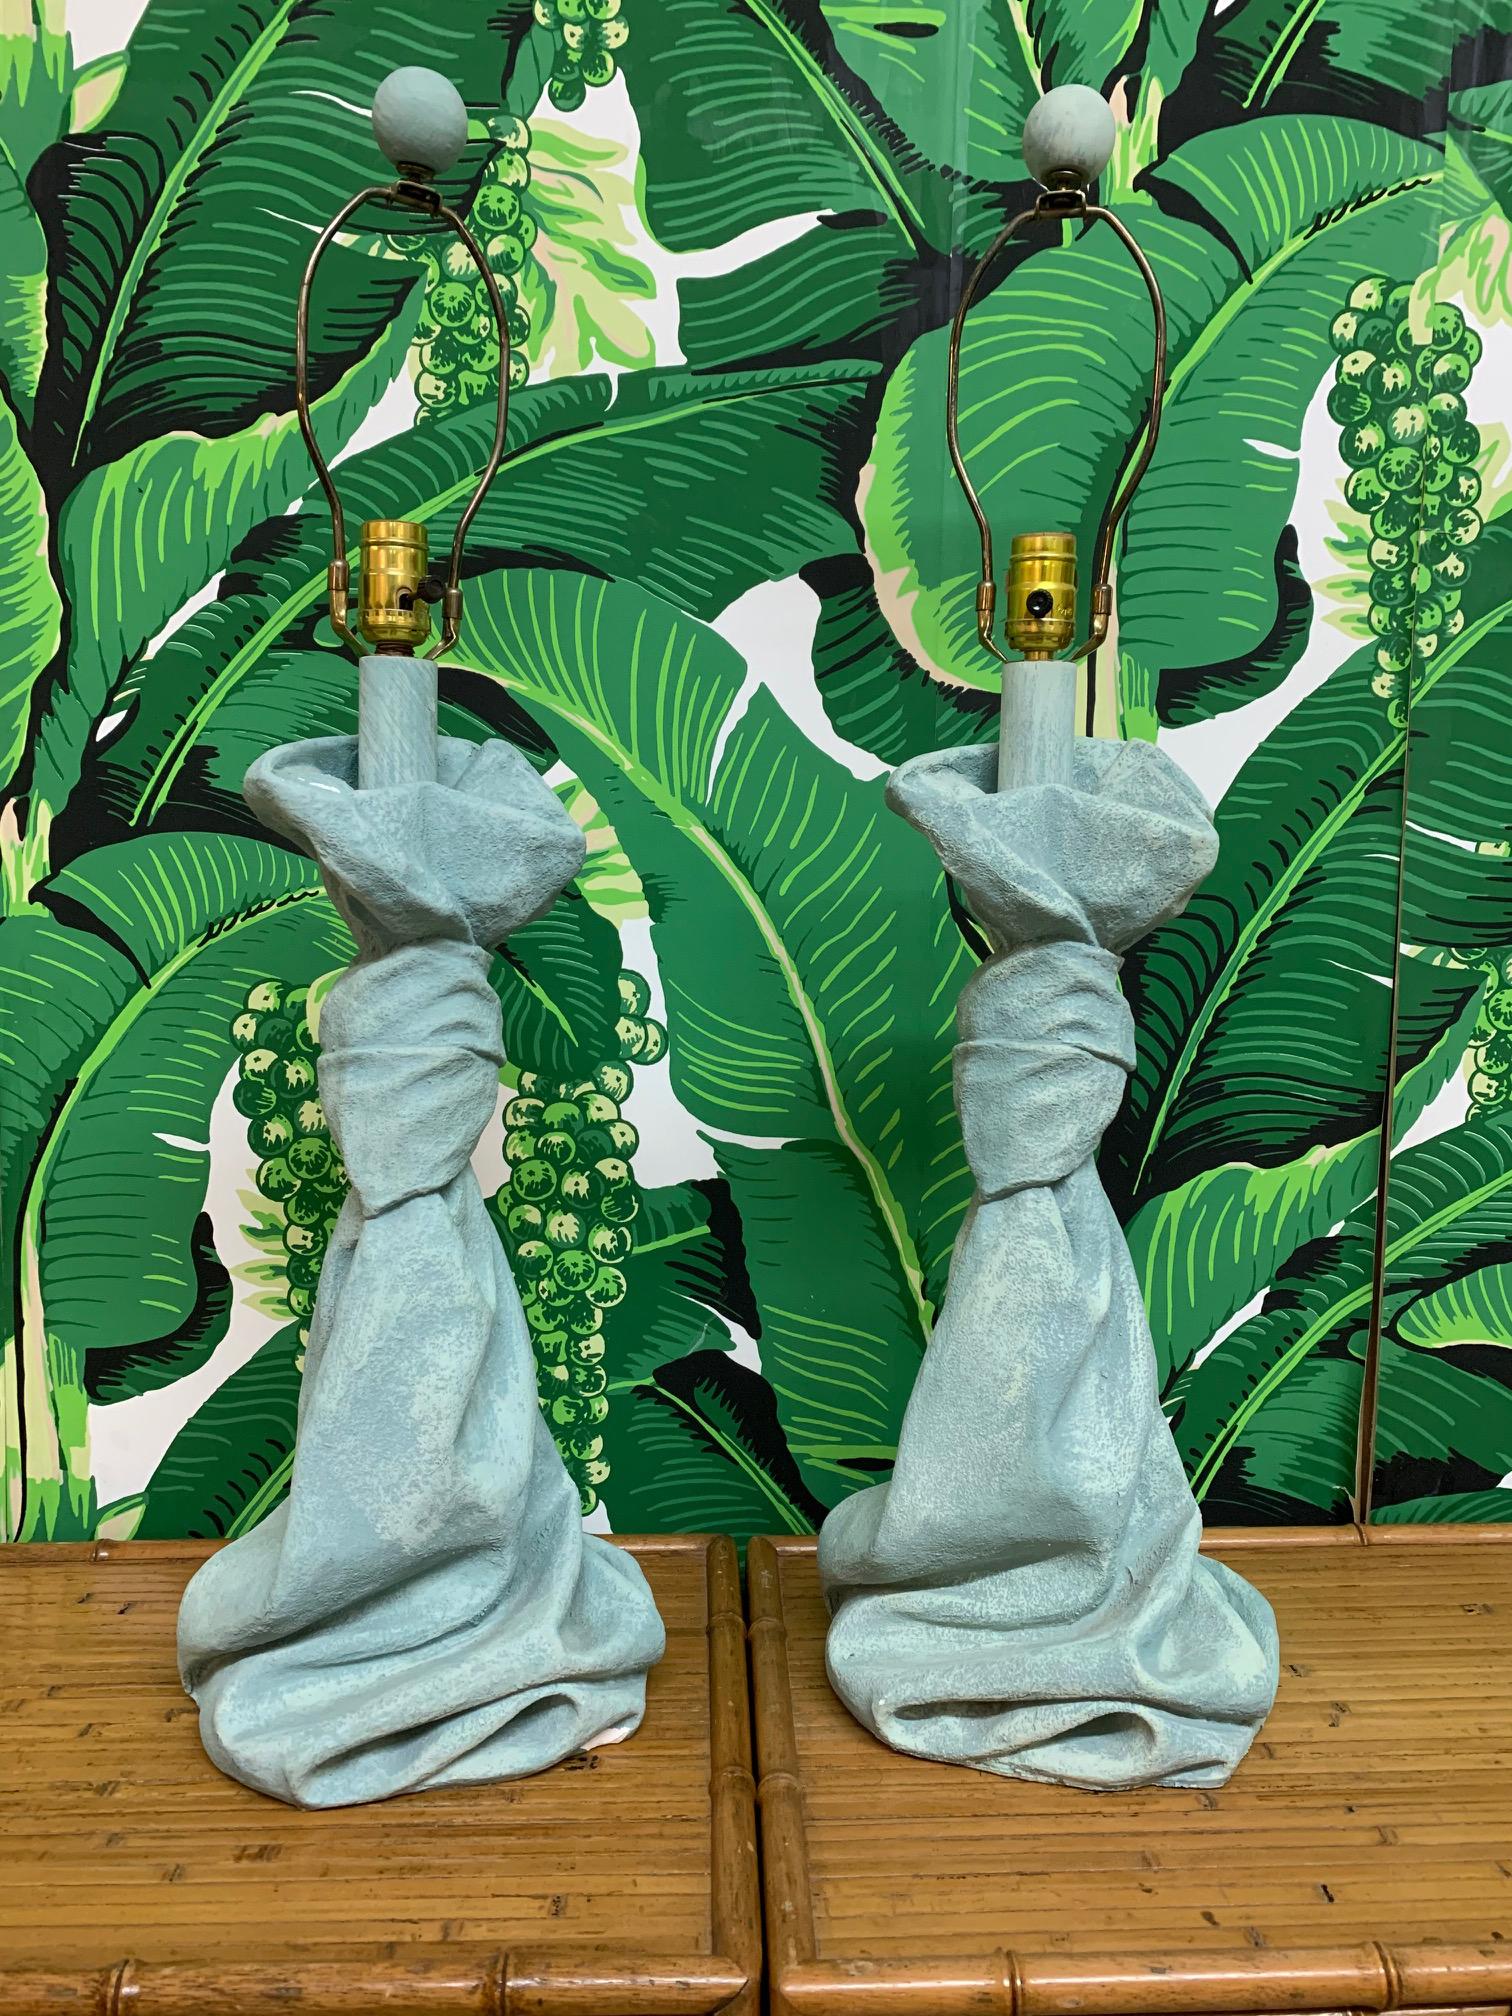 Pair of table lamps in draped fabric motif in the style of John Dickinson. Heavy plaster construction. Good vintage condition with imperfections consistent with age (see photos).
 